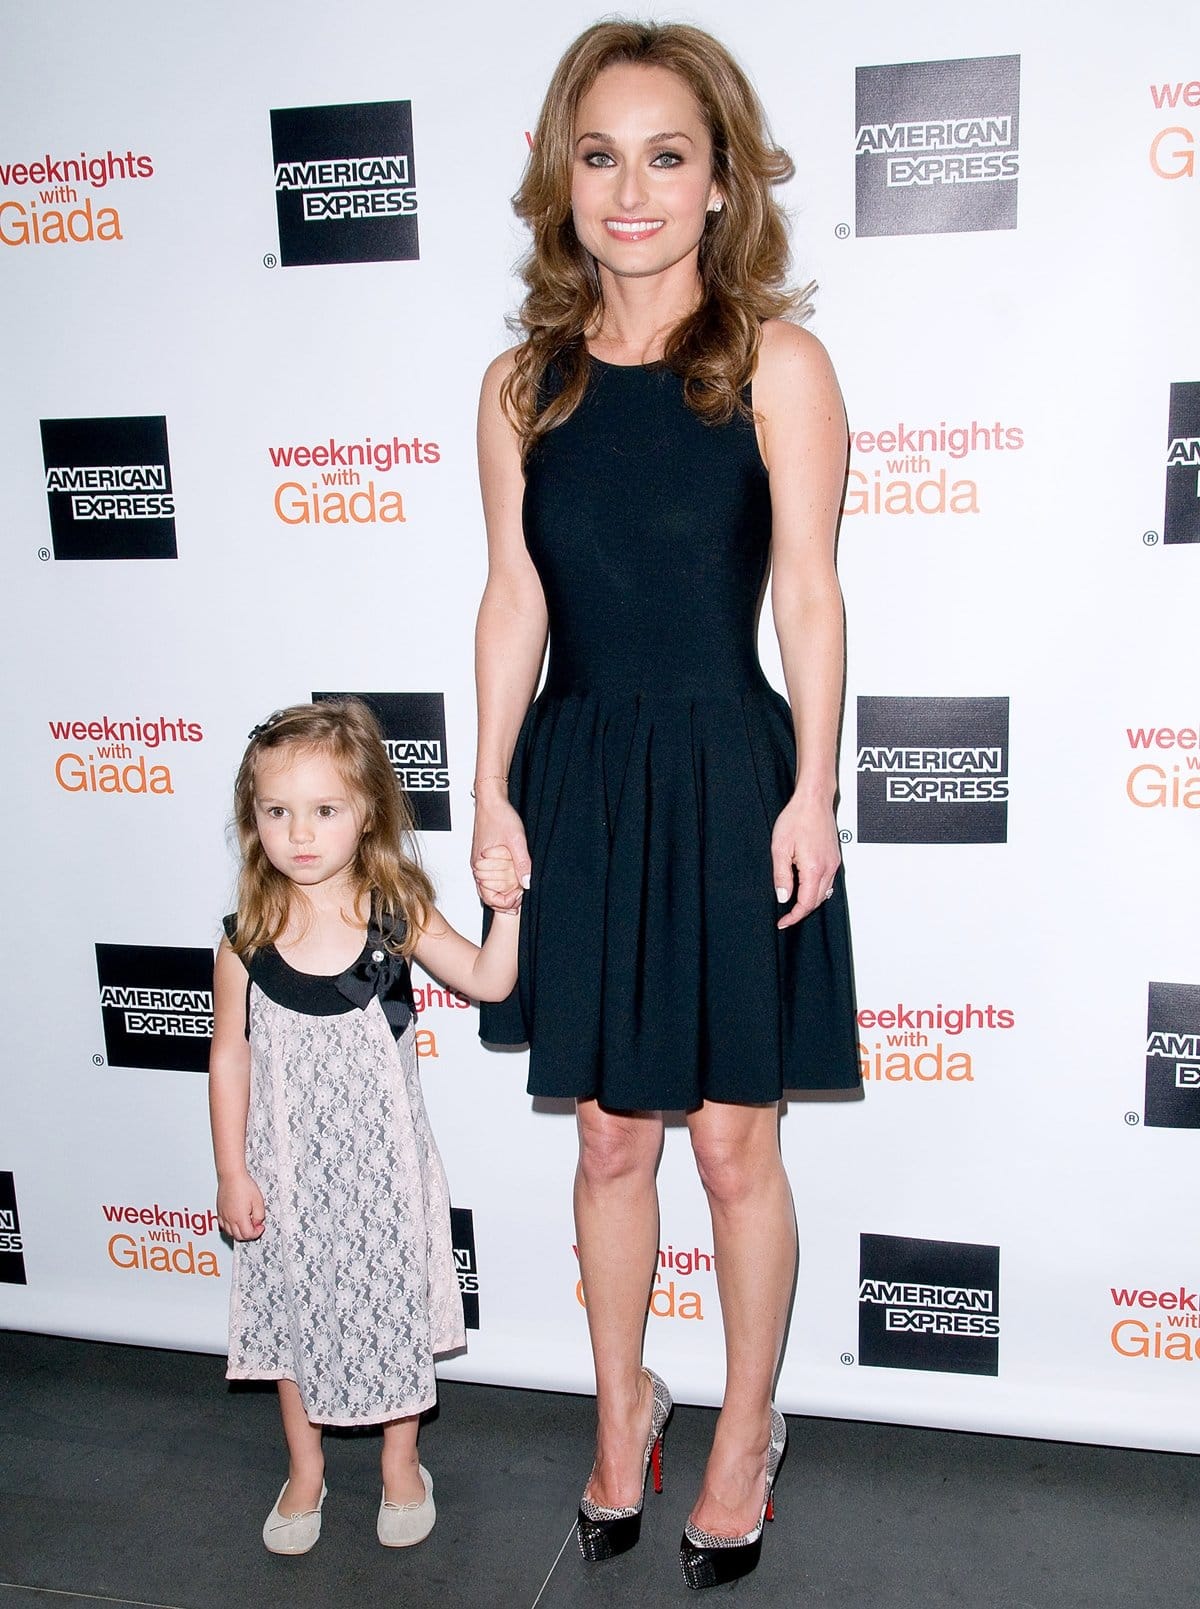 Jade Marie De Laurentiis Thompson and her mother, television personality Giada DeLaurentiis, attend Giada DeLaurentiis' "Weeknights With Giada" book launch party